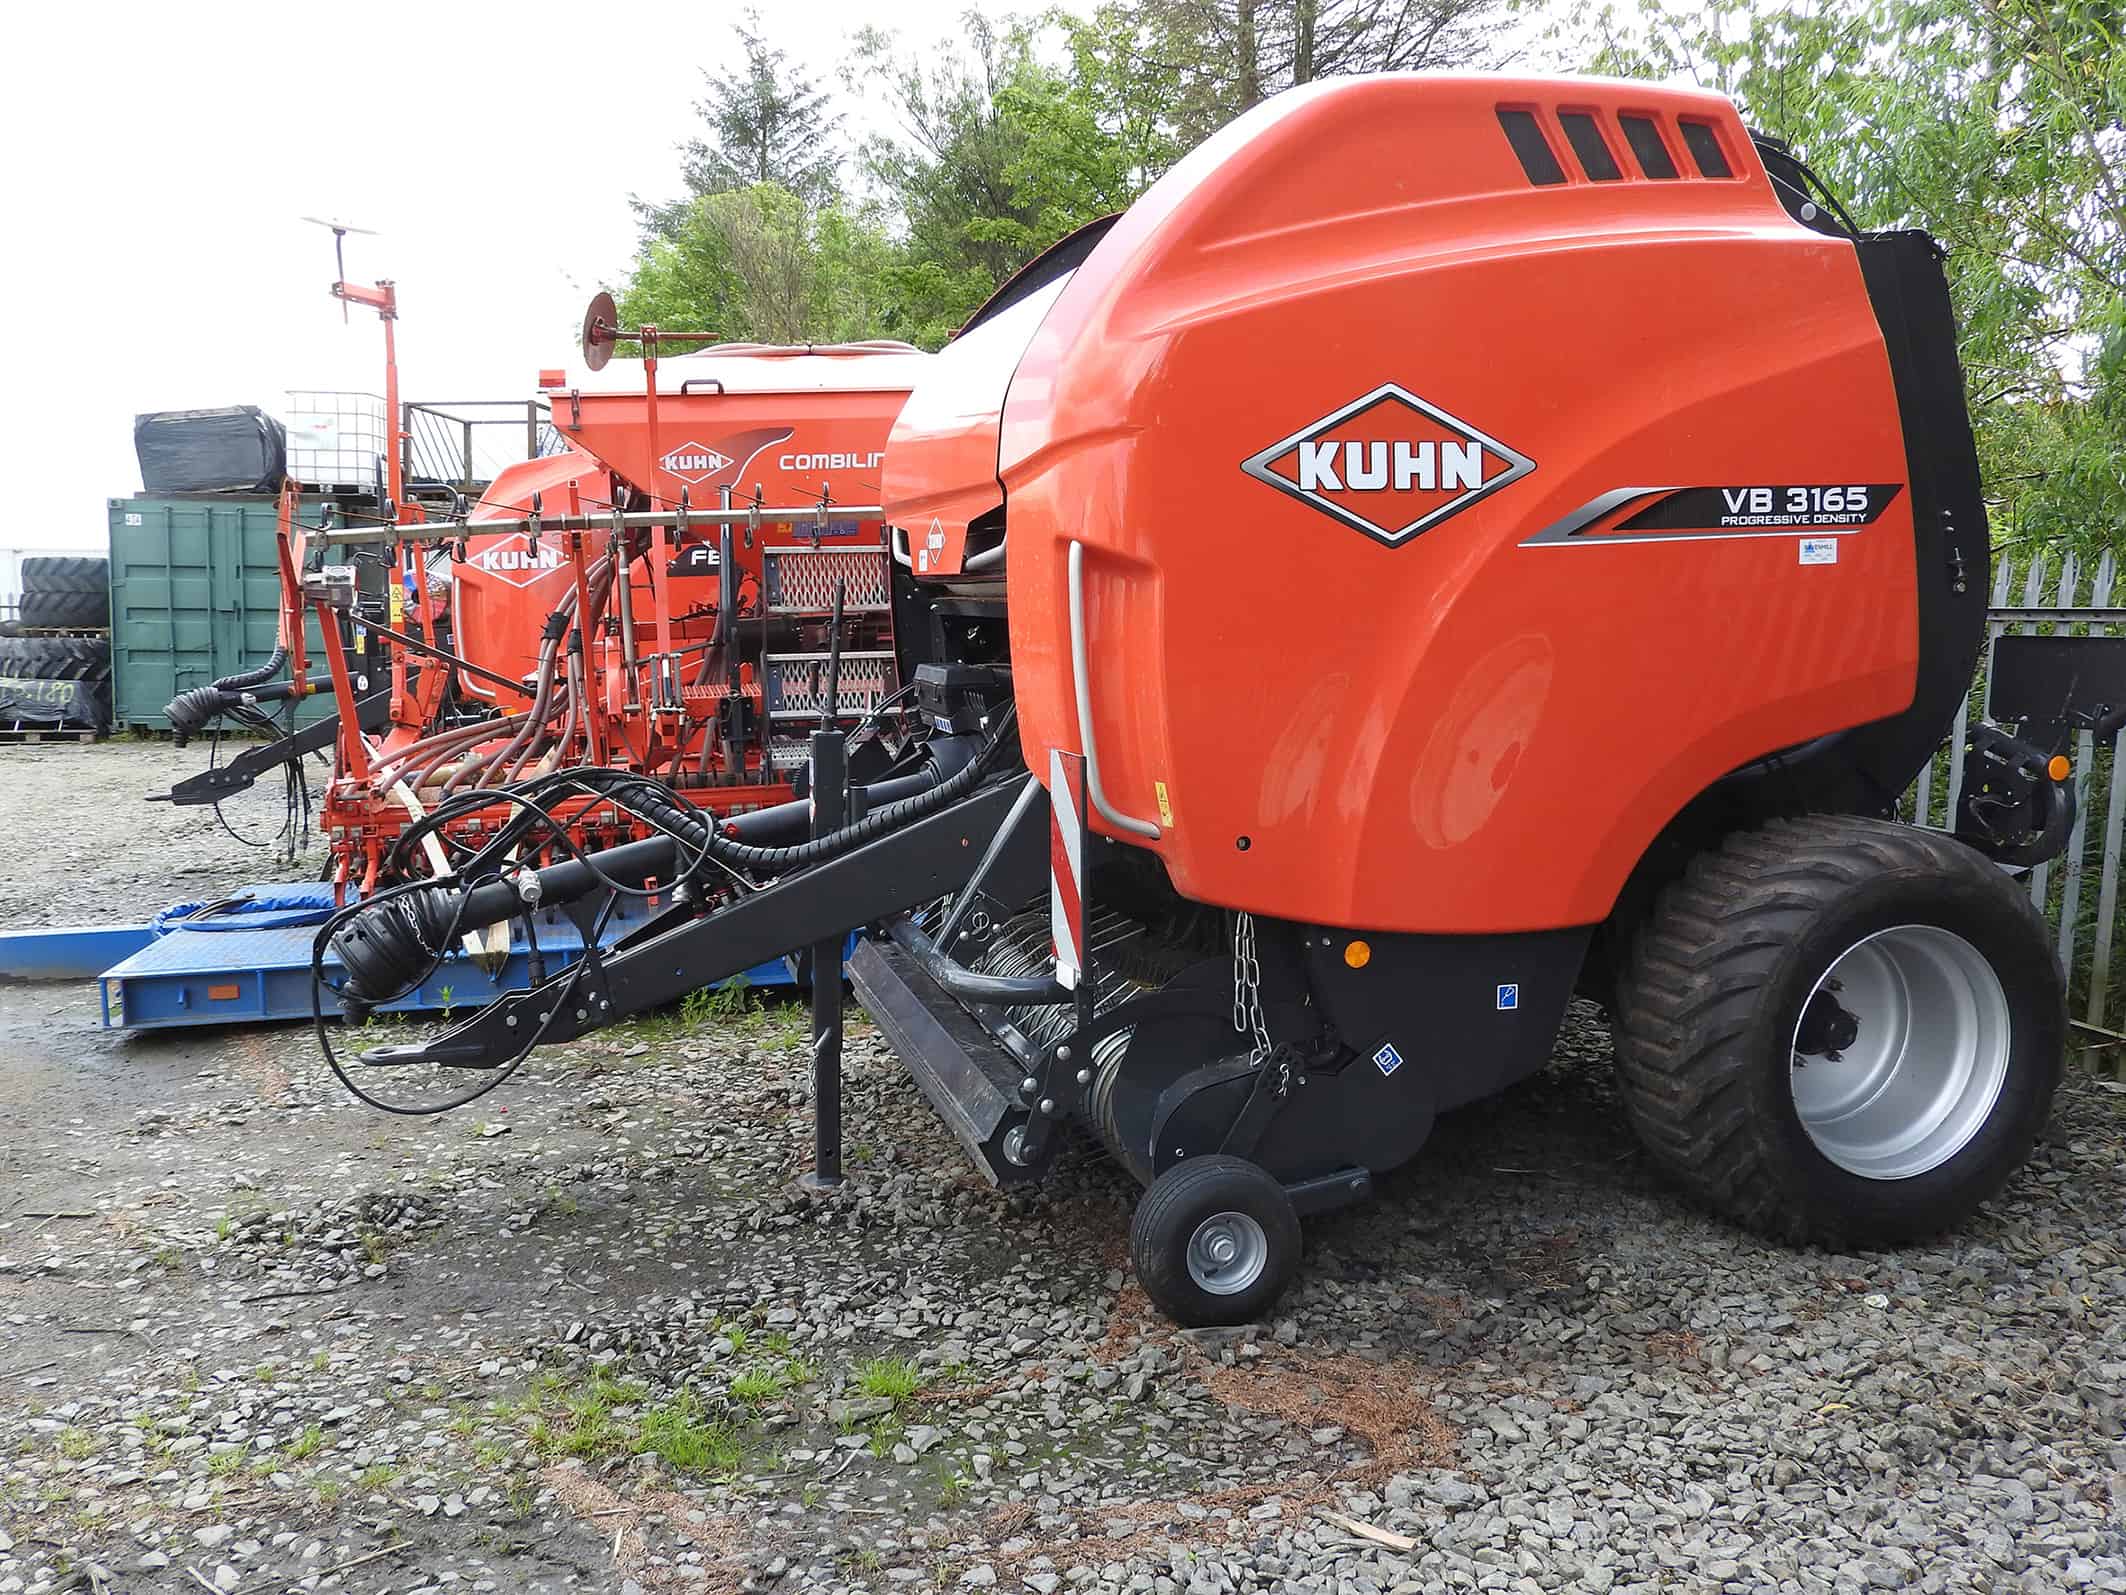 Online services for Kuhn machines up to 20 years old